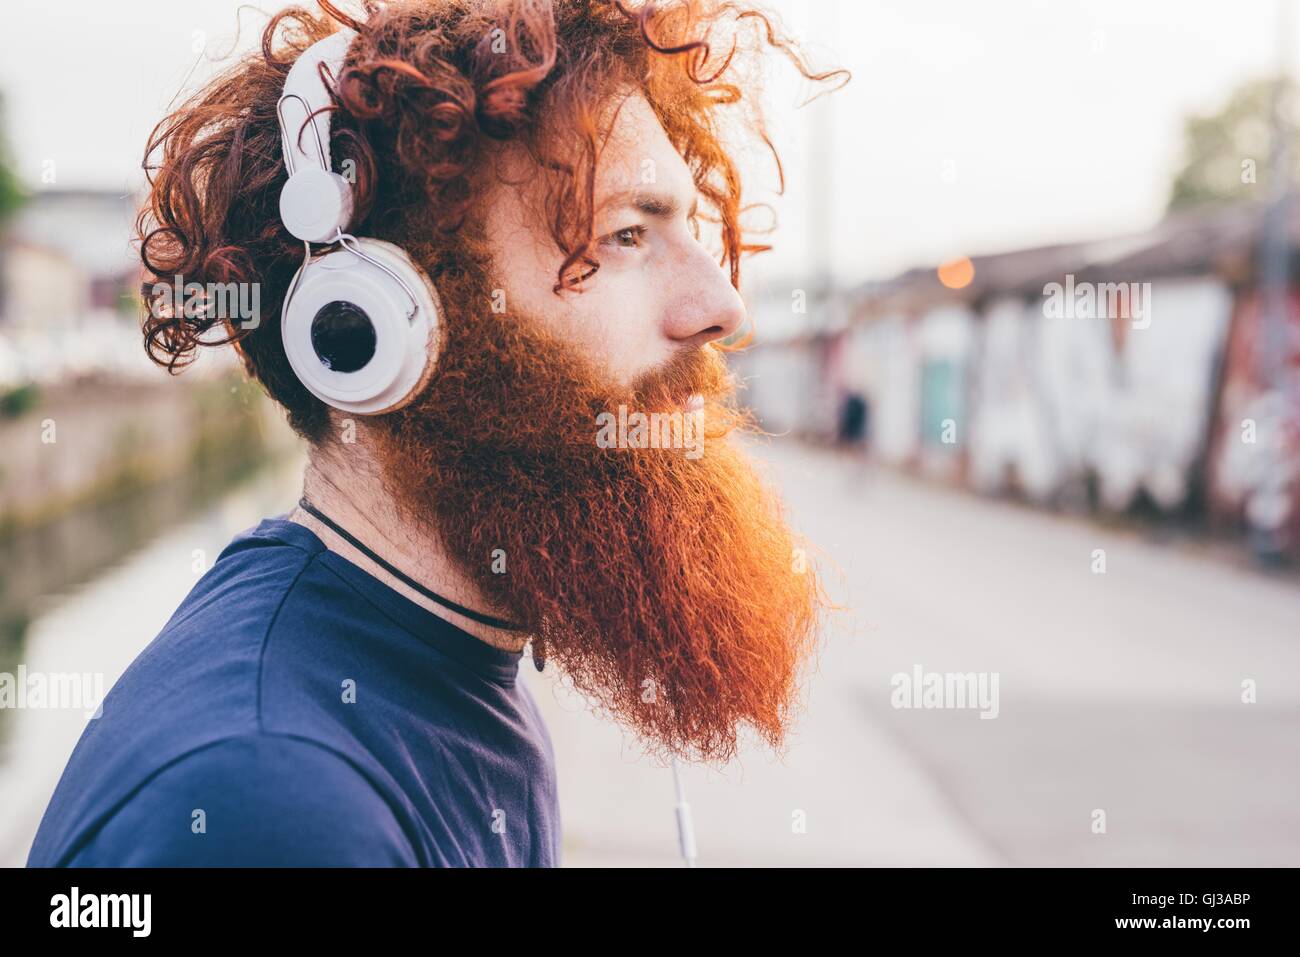 Young male hipster with red hair and beard listening to headphones in city Stock Photo